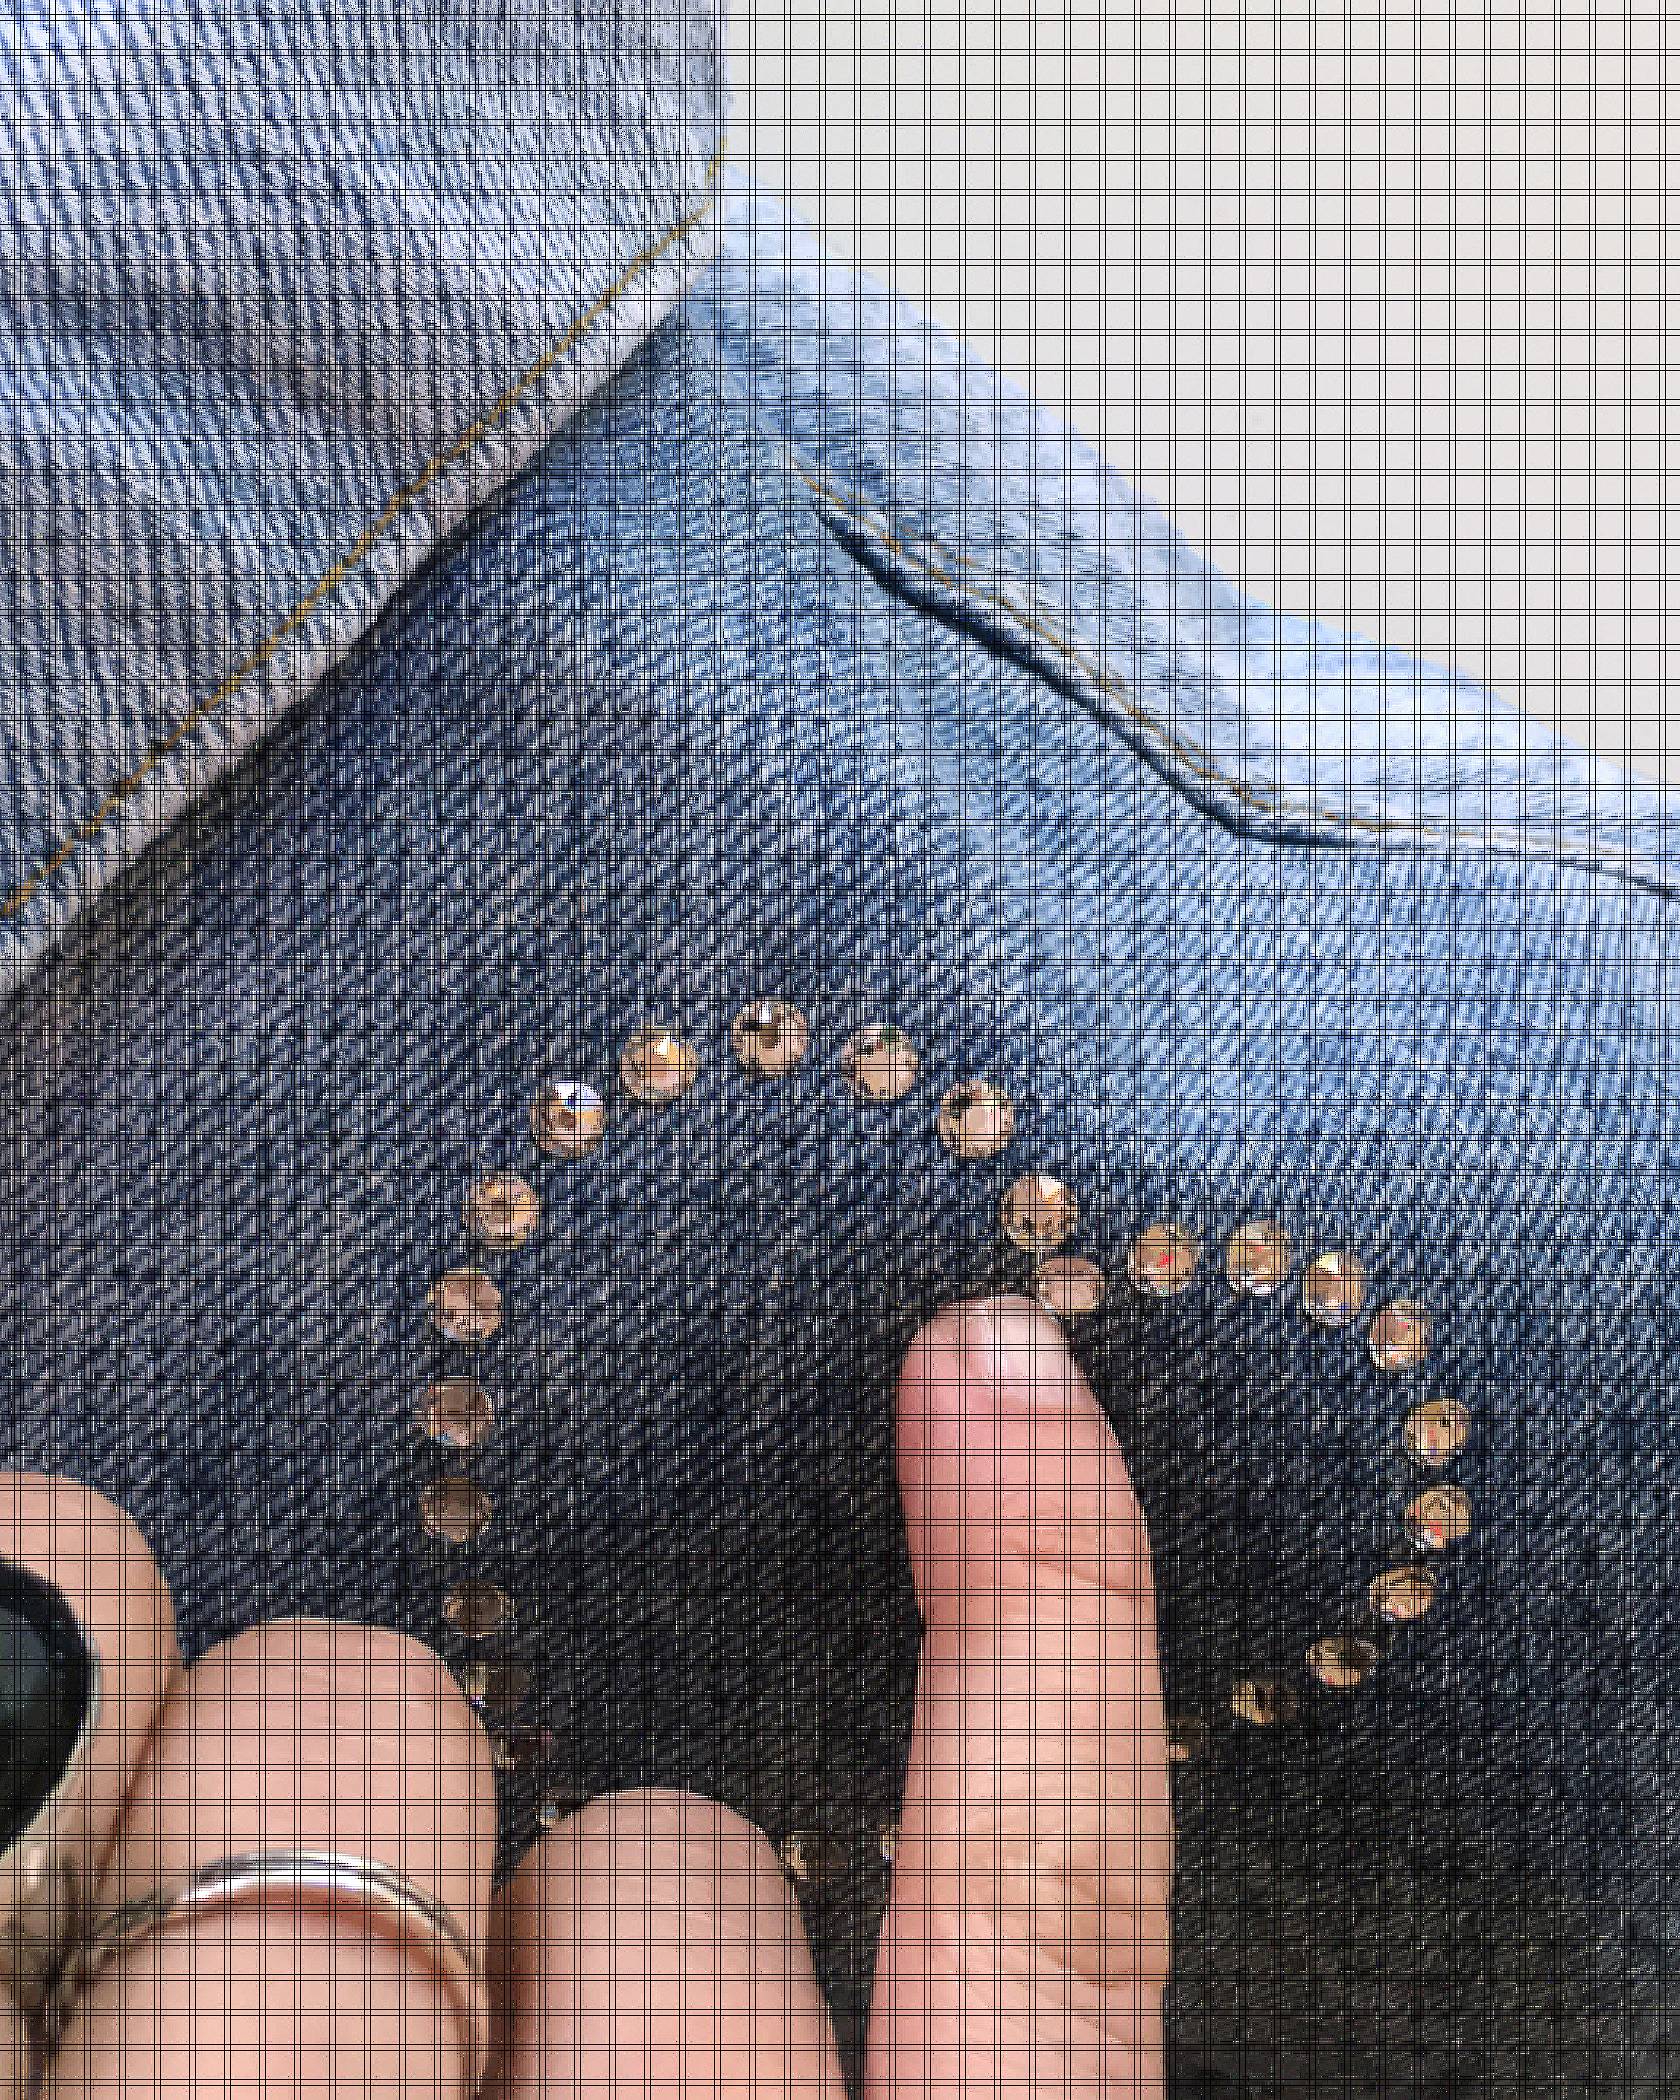 close up crystals on denim jacket with hand